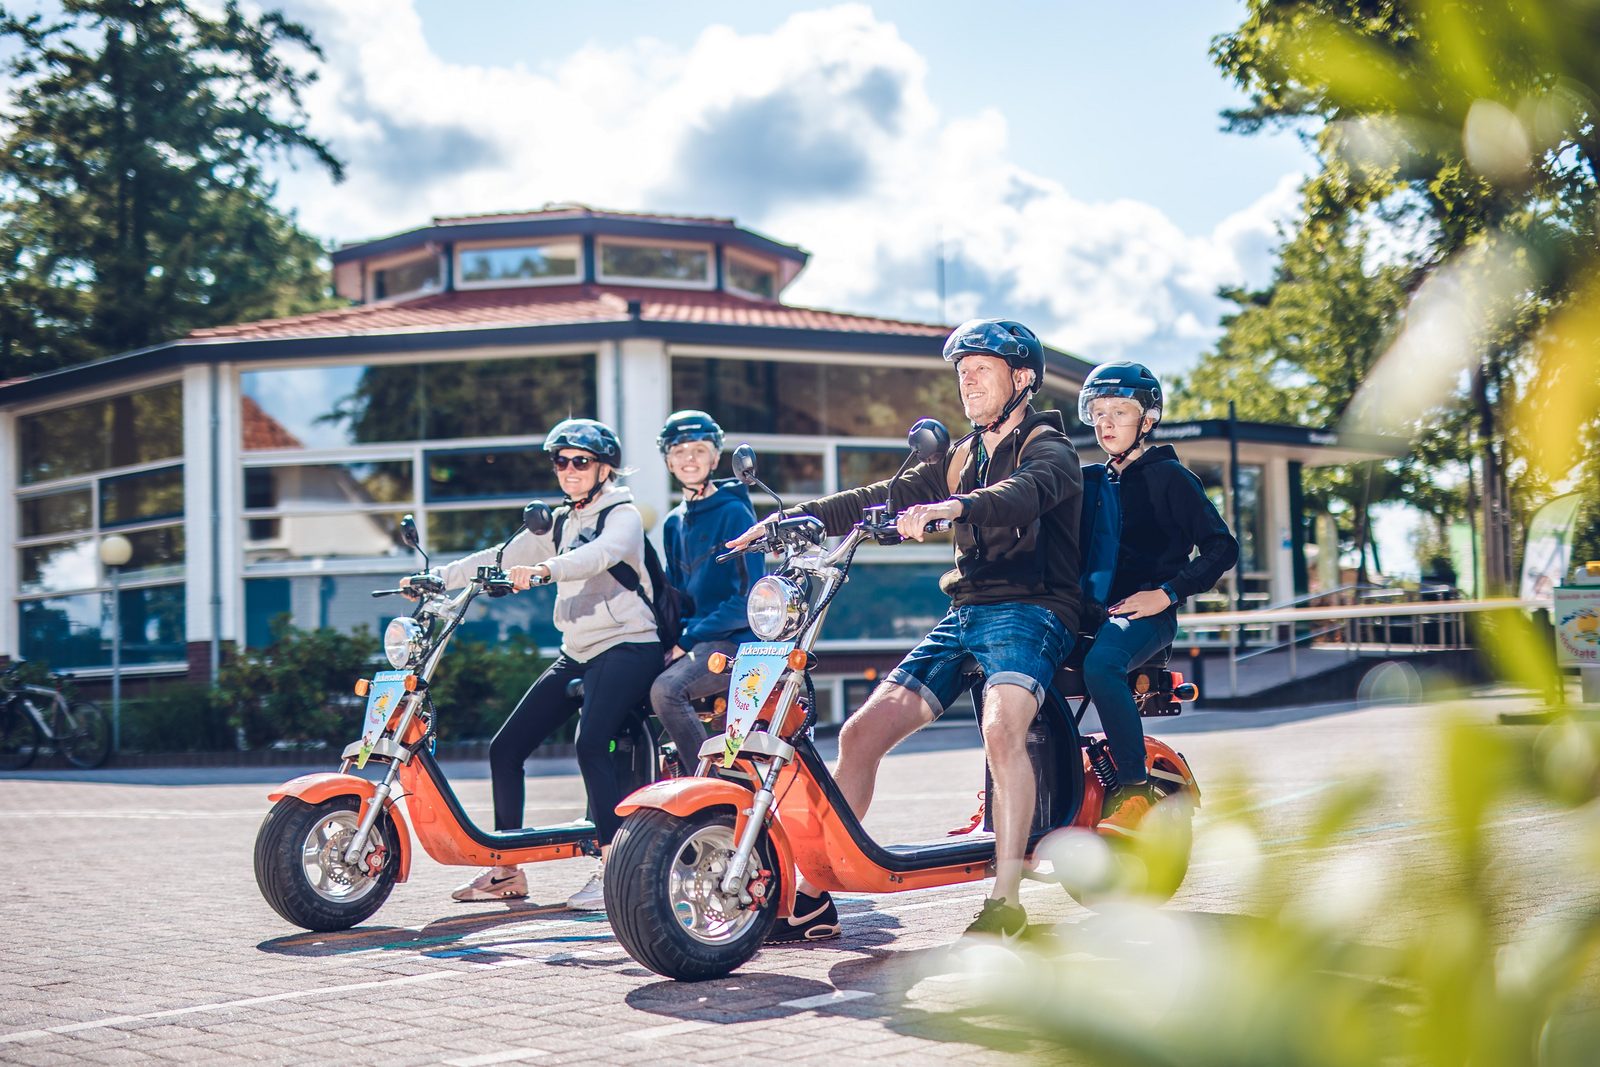 Scooter hire